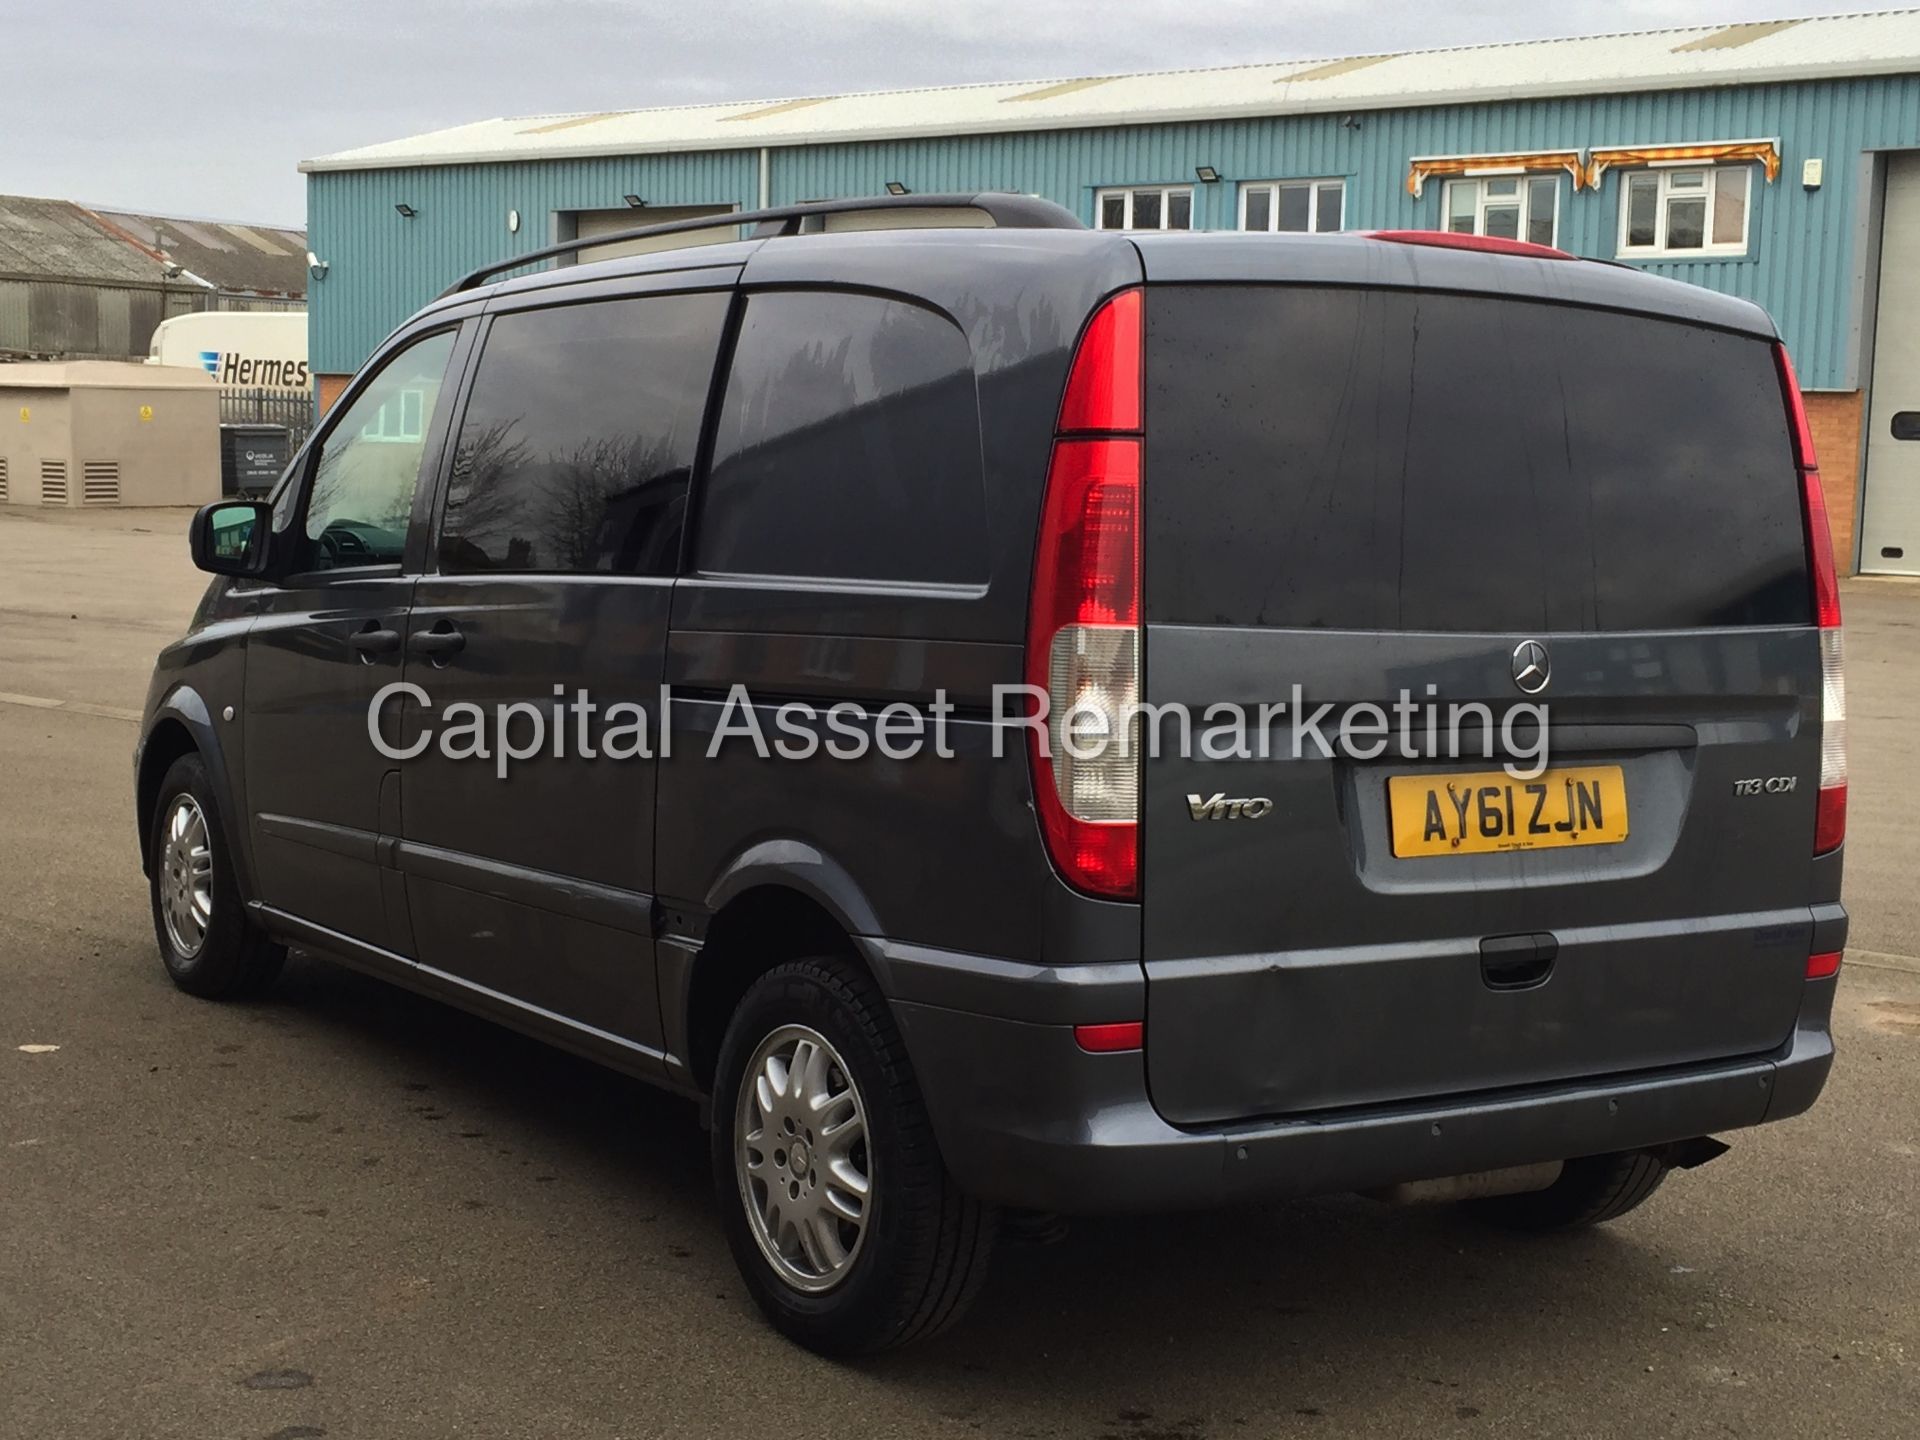 (ON SALE) MERCEDES VITO 113 CDI (2012 MODEL) DUAL LINER - AUTO - AIR CON -  'HUGE SPEC' 1 OWNER - Image 5 of 23